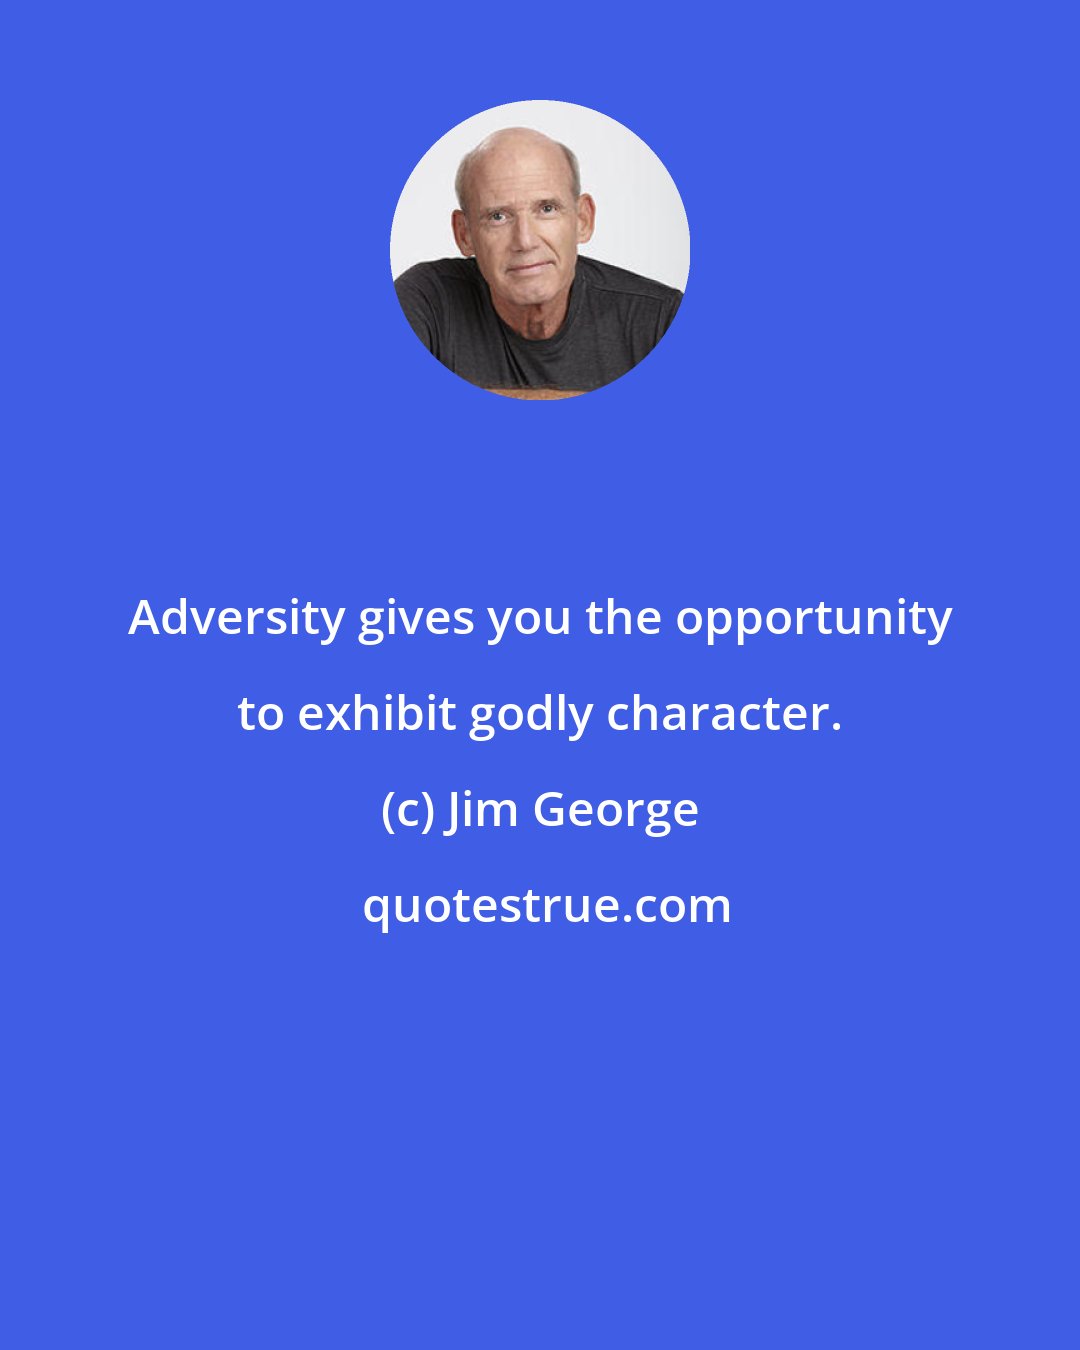 Jim George: Adversity gives you the opportunity to exhibit godly character.